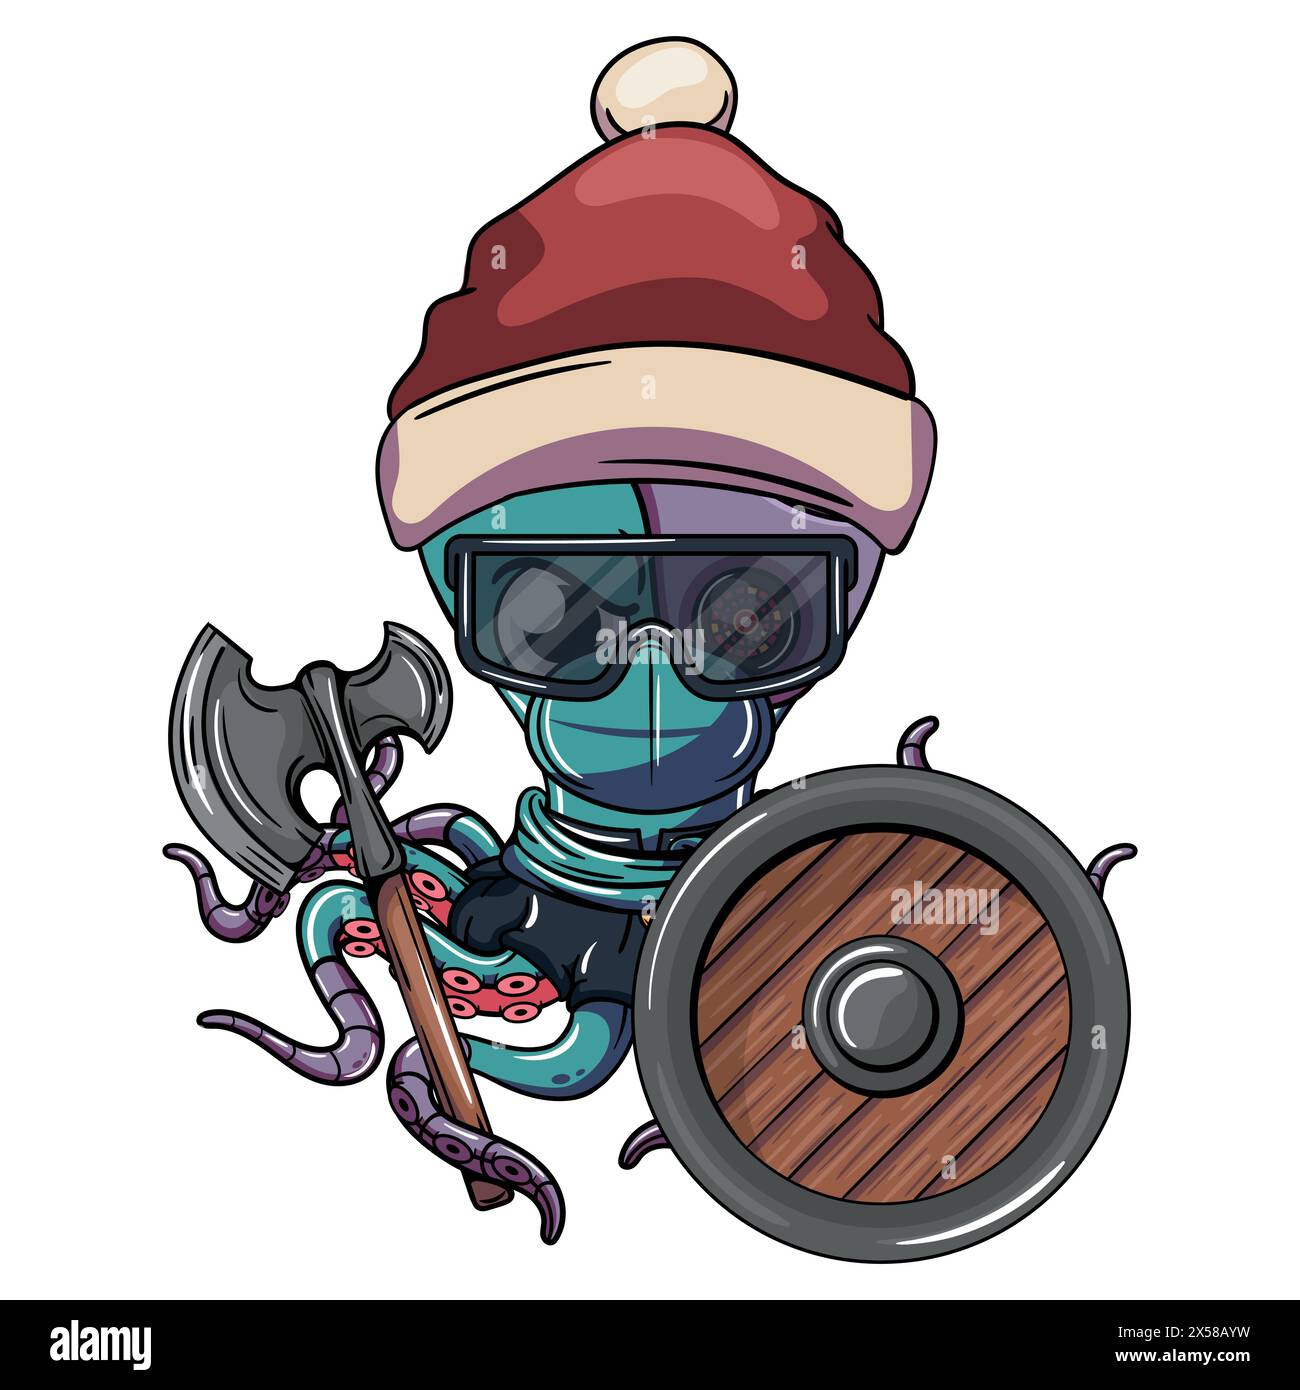 Angry comic cartoon cyborg octopus at Christmas with Santa Claus hat, glasses, mask with a war ax and shield on his robotic tentacle. Illustration for Stock Vector